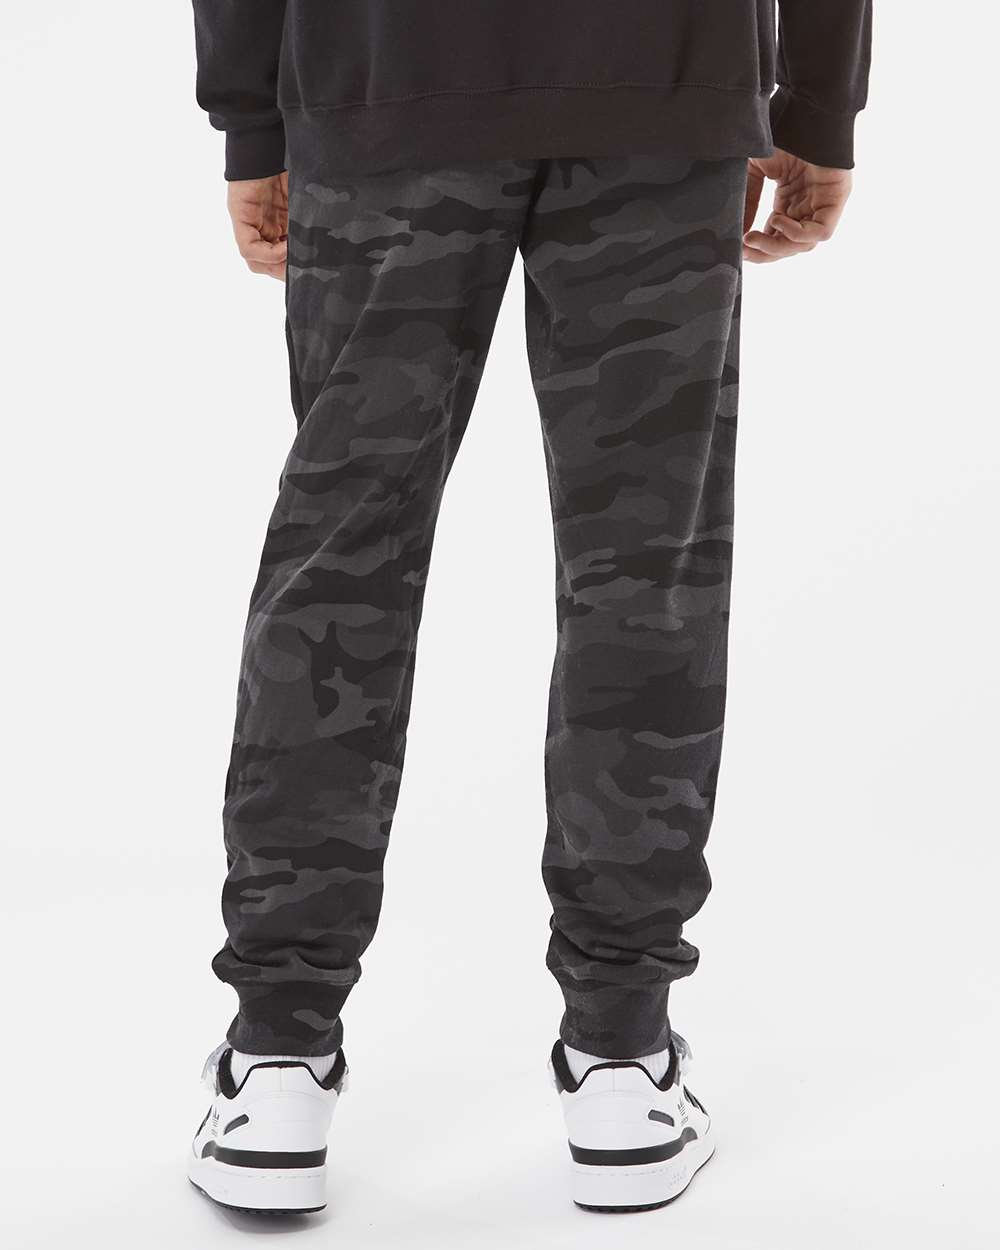 Back of Black Camo Sweatpants from Nudge Printing